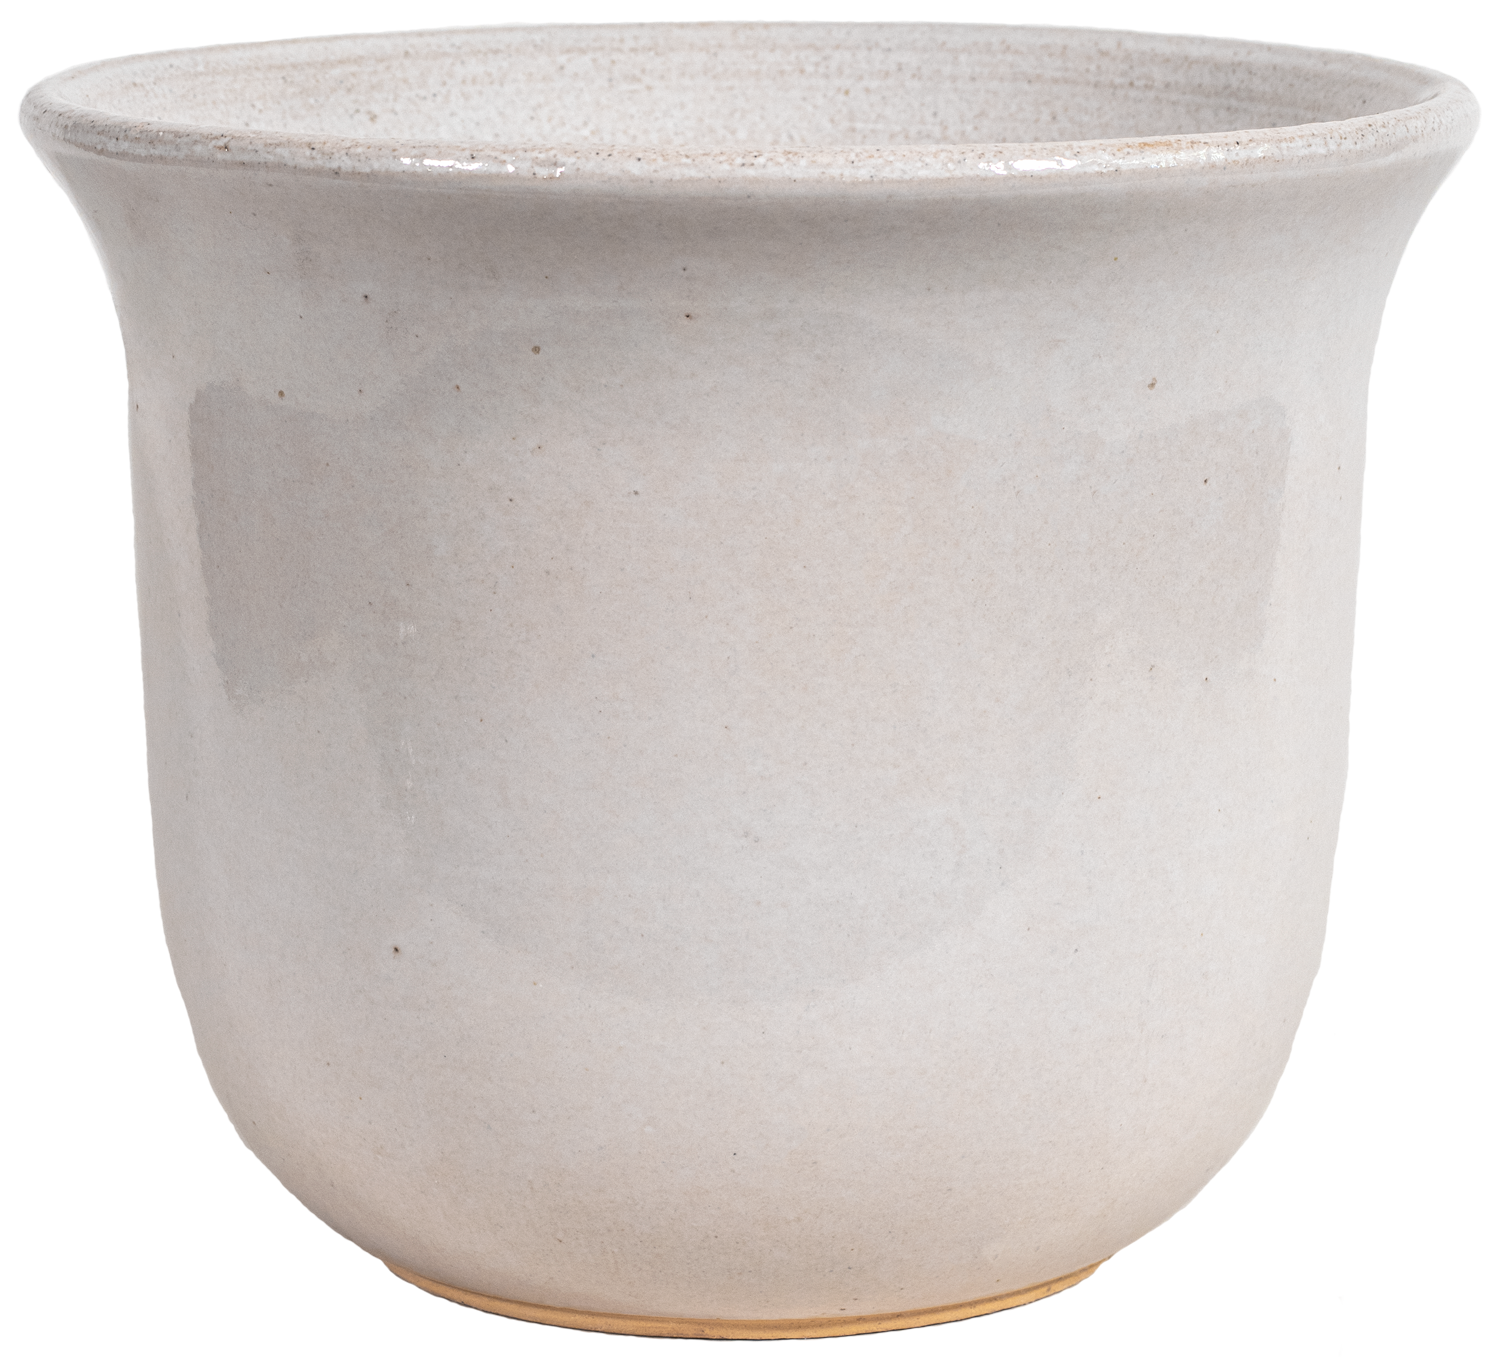 large ceramic white planter in a bell shape